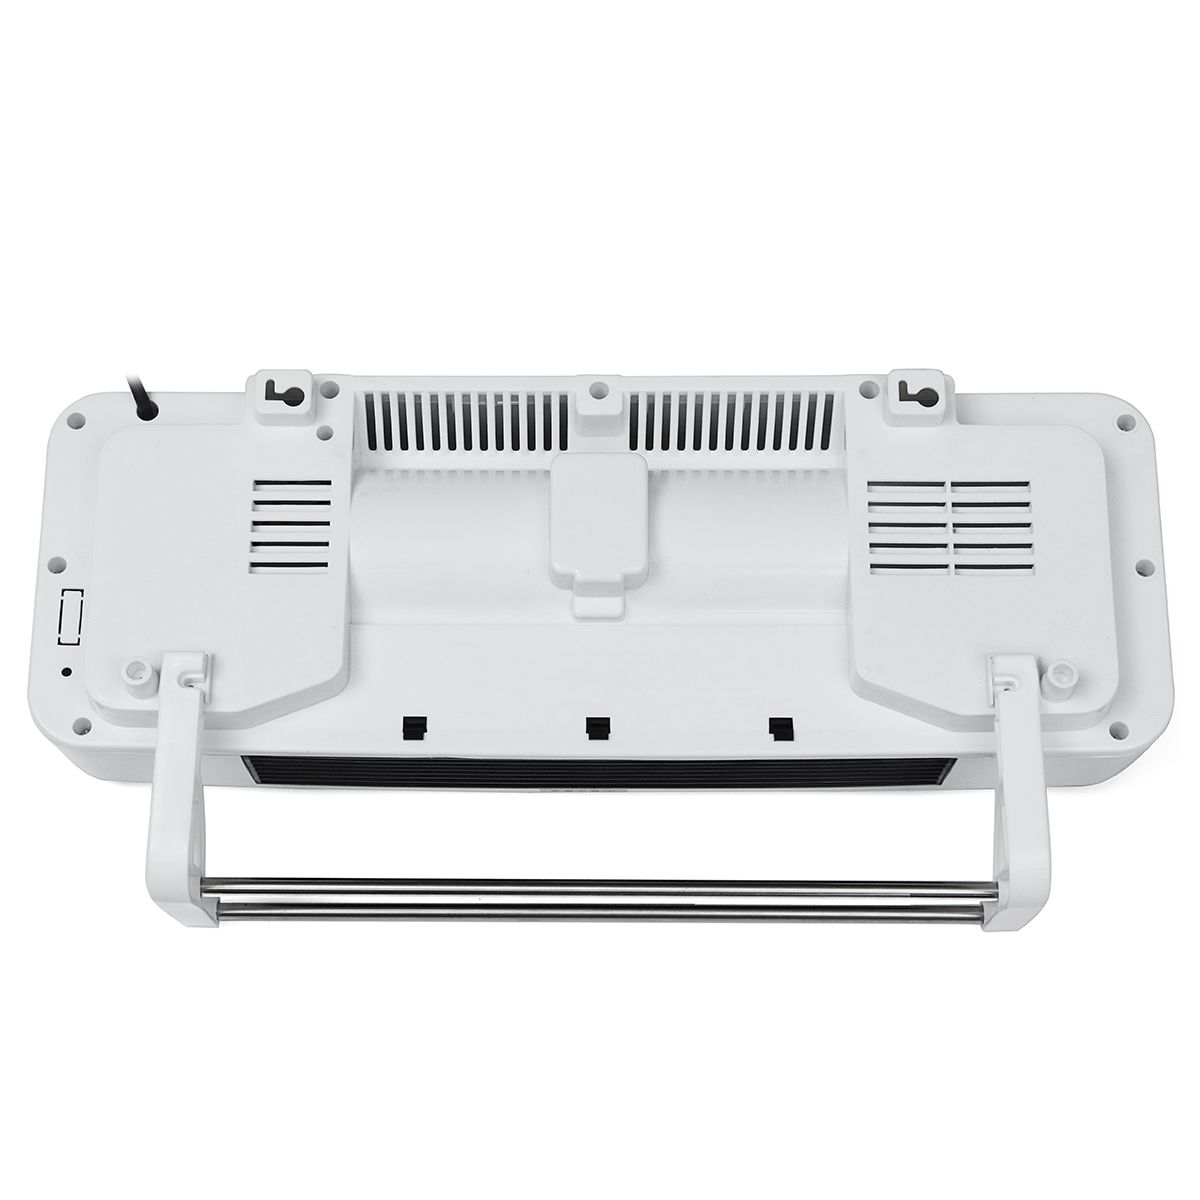 2000W-220V-Wall-Mounted-Heater-Timing-Space-Heating-PTC-Air-Conditioner-Dehumidifier-1381932